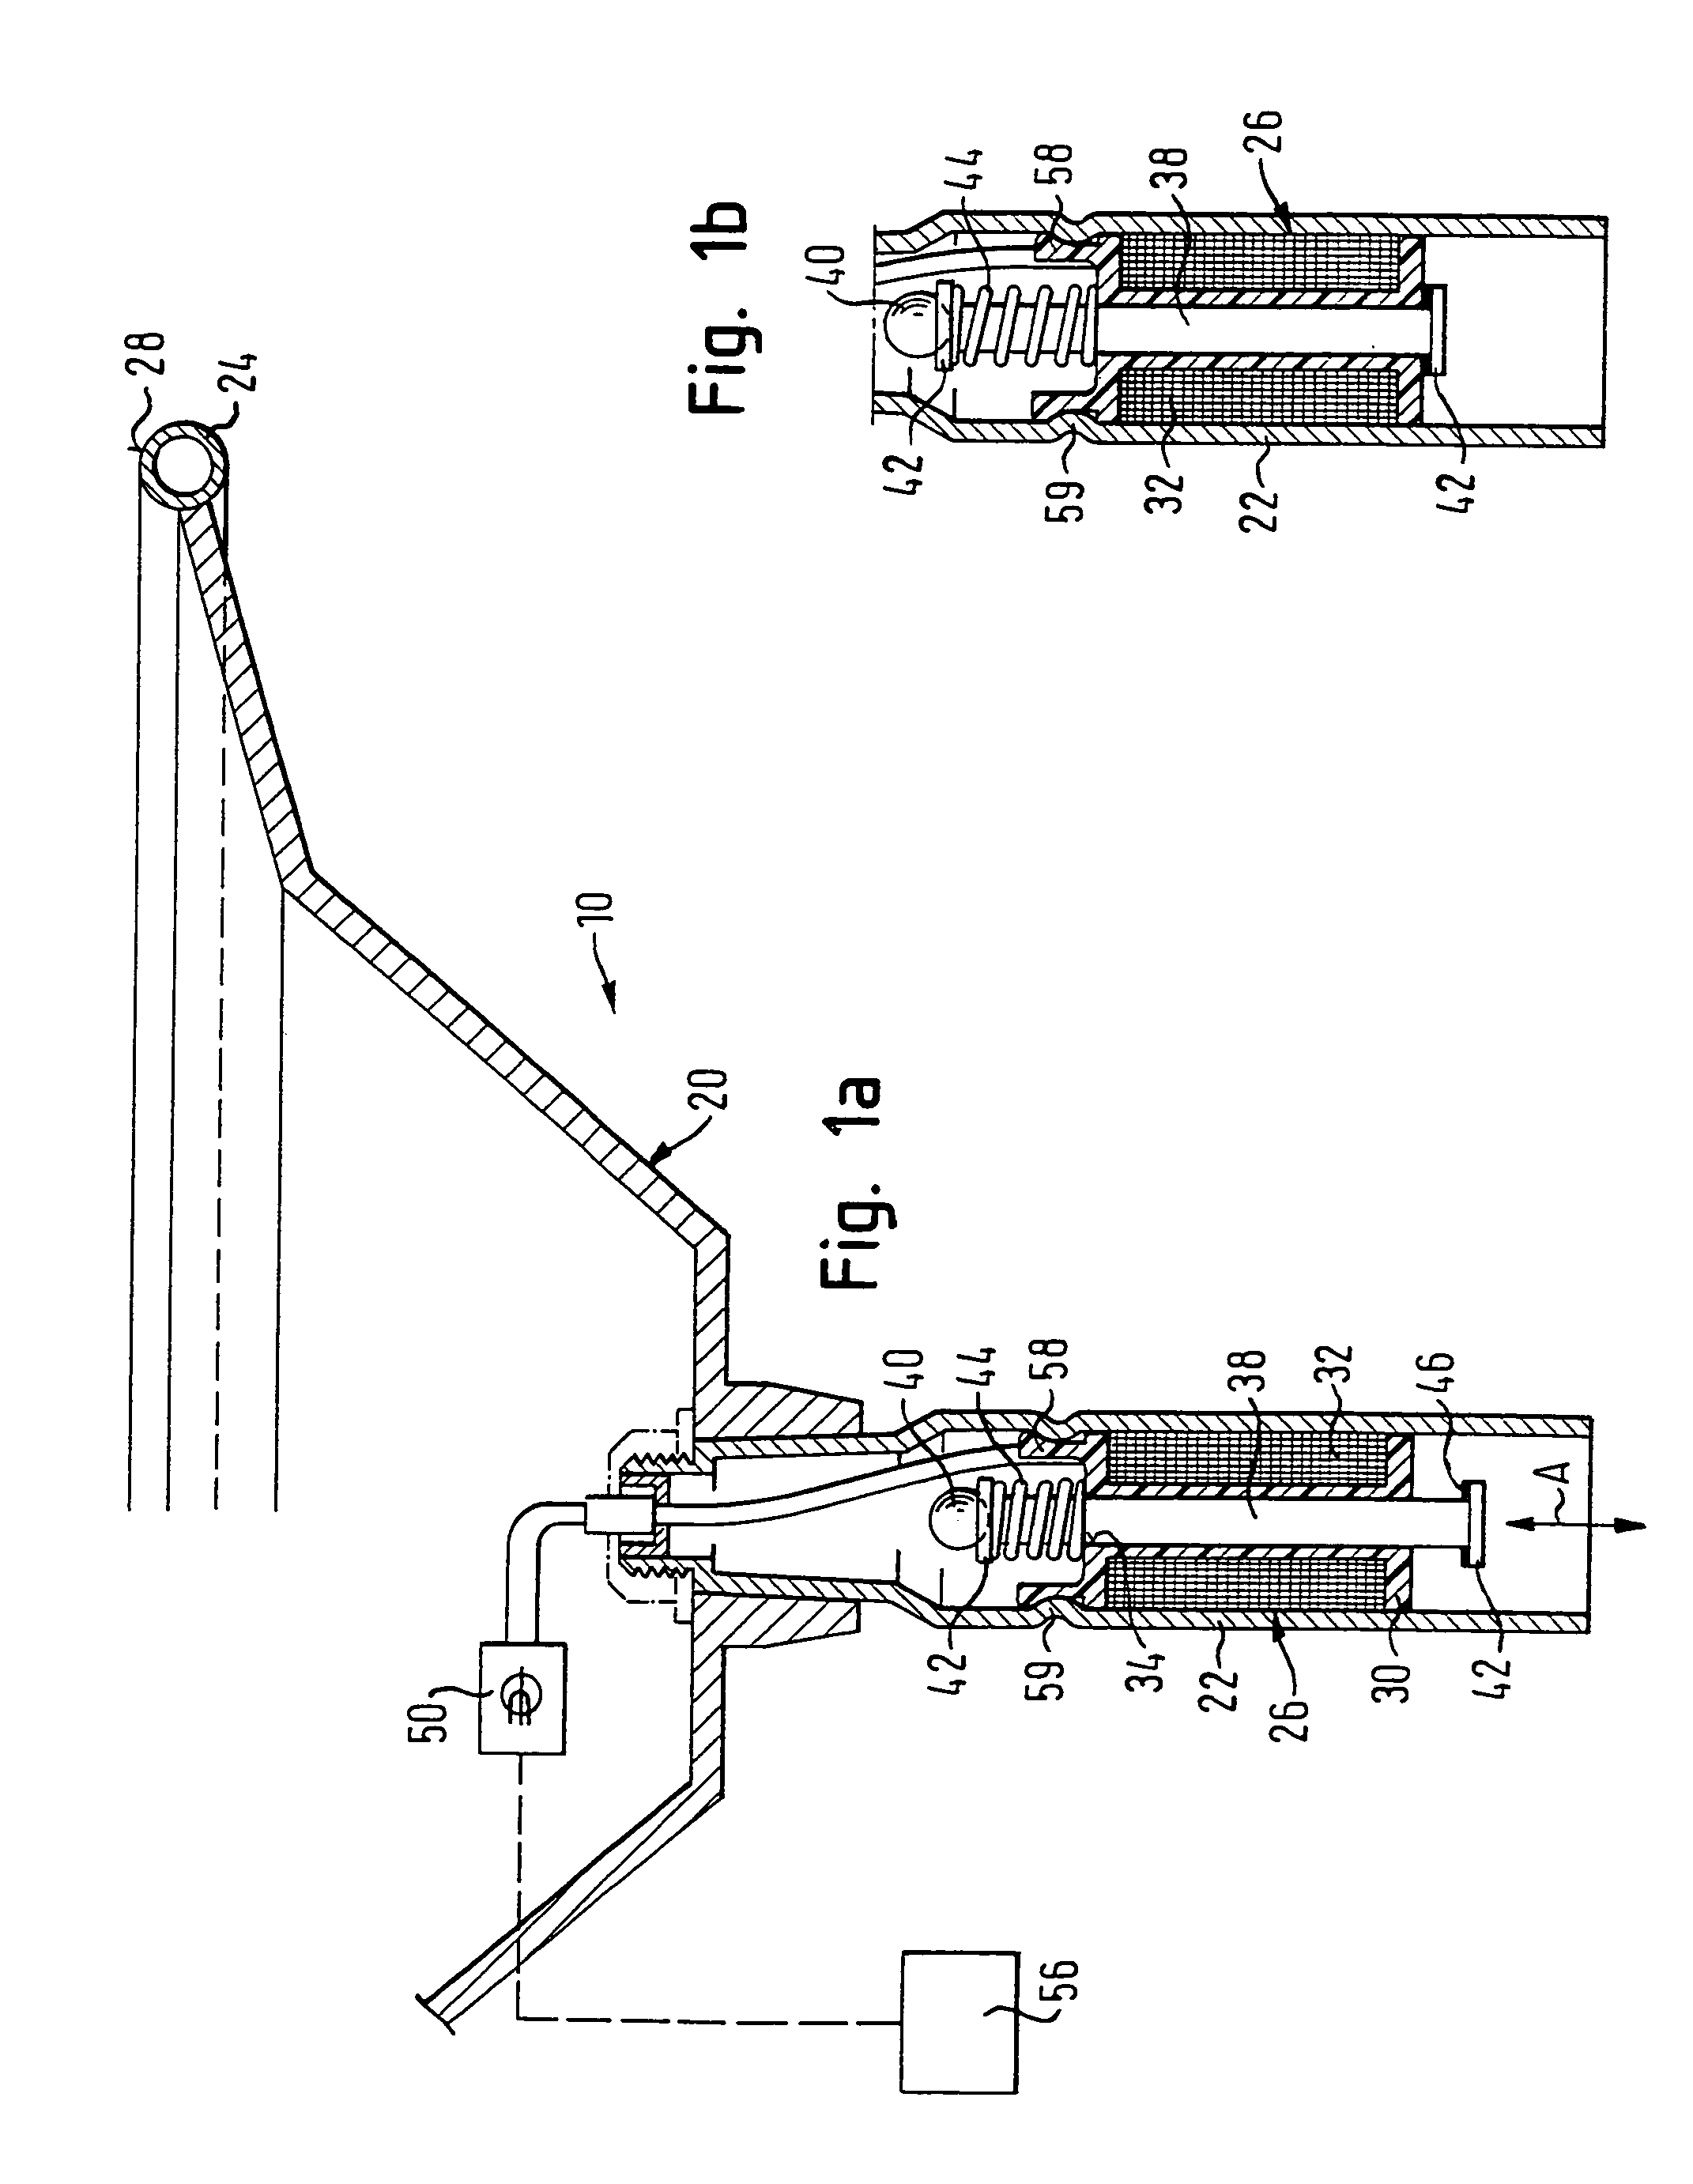 Vehicle steering device and safety system